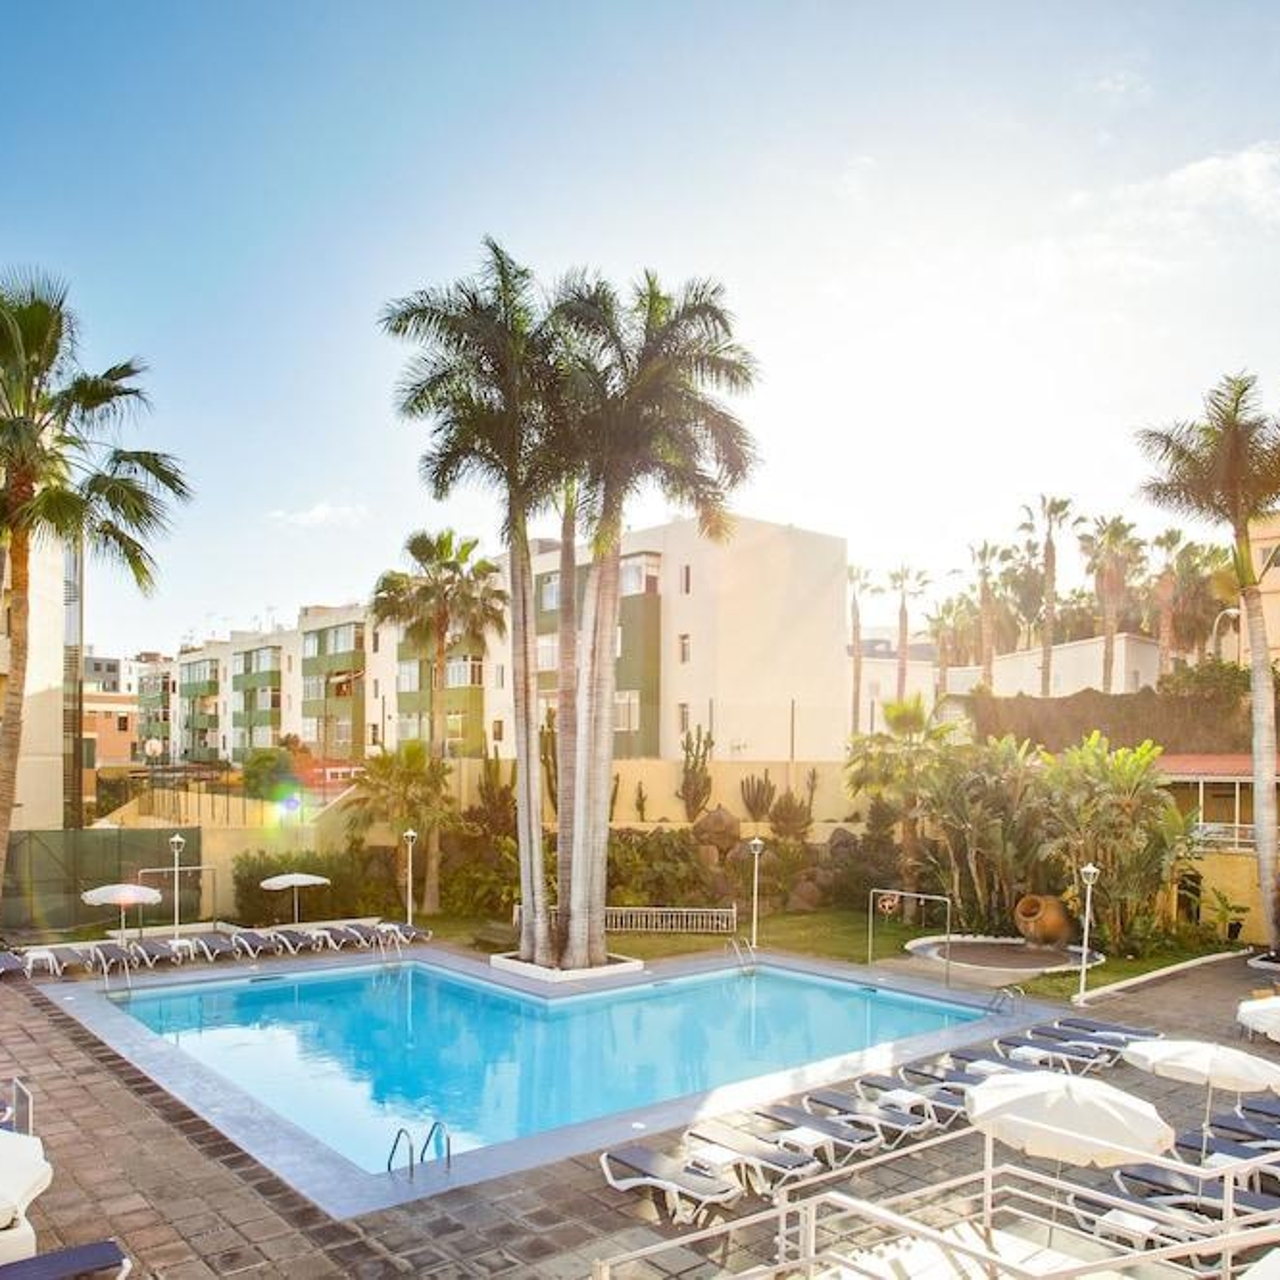 Hotel Be Live Adults Only Tenerife Spain at HRS with free services